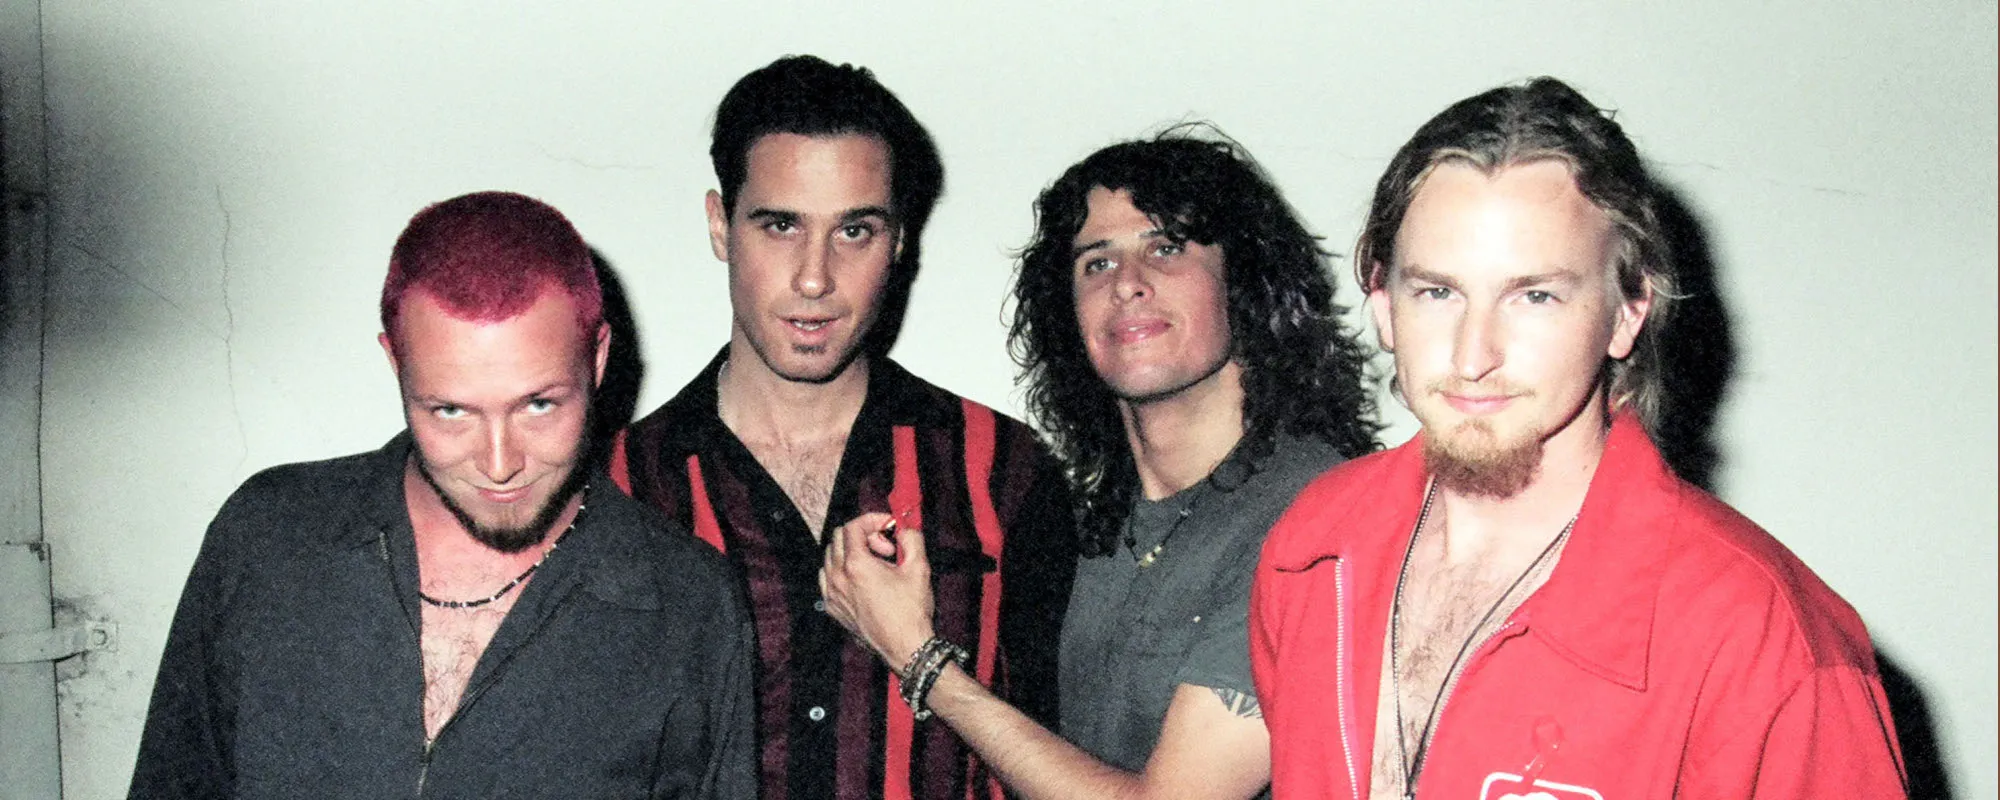 Behind the Band Name: Stone Temple Pilots (STP)